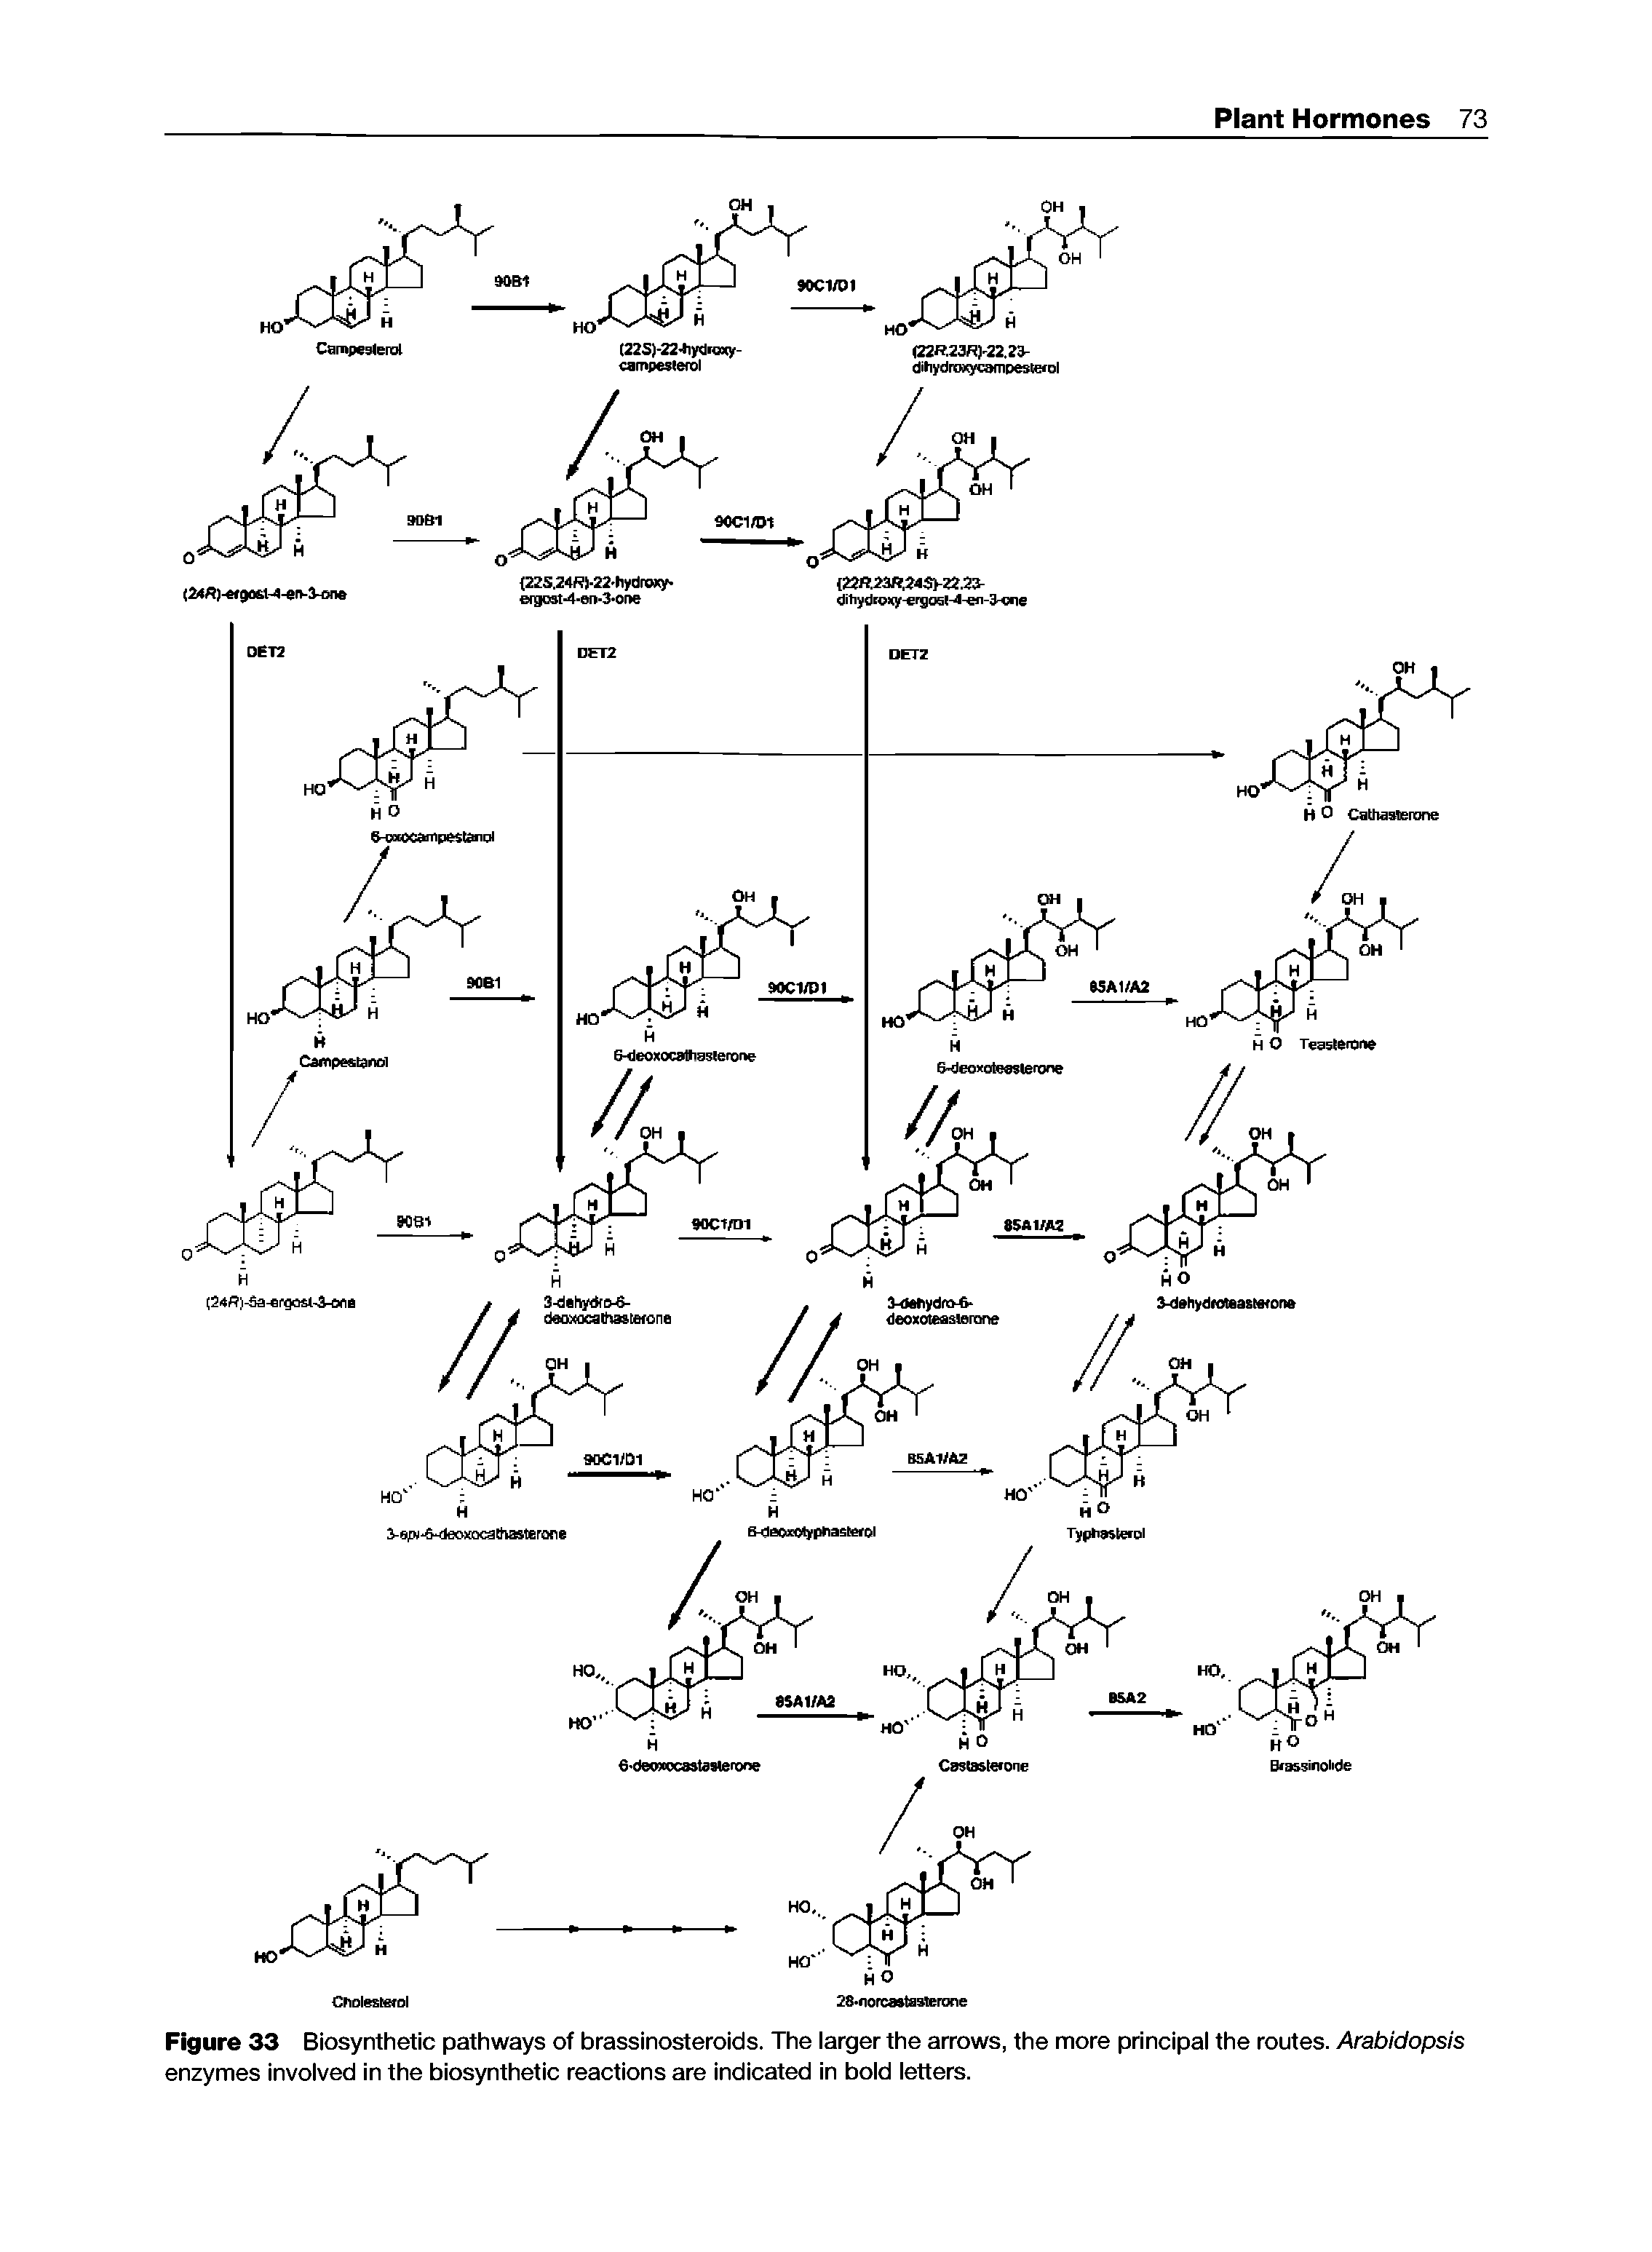 Figure 33 Biosynthetic pathways of brassinosteroids. The larger the arrows, the more principal the routes. Arabidopsis enzymes involved in the biosynthetic reactions are indicated in bold letters.